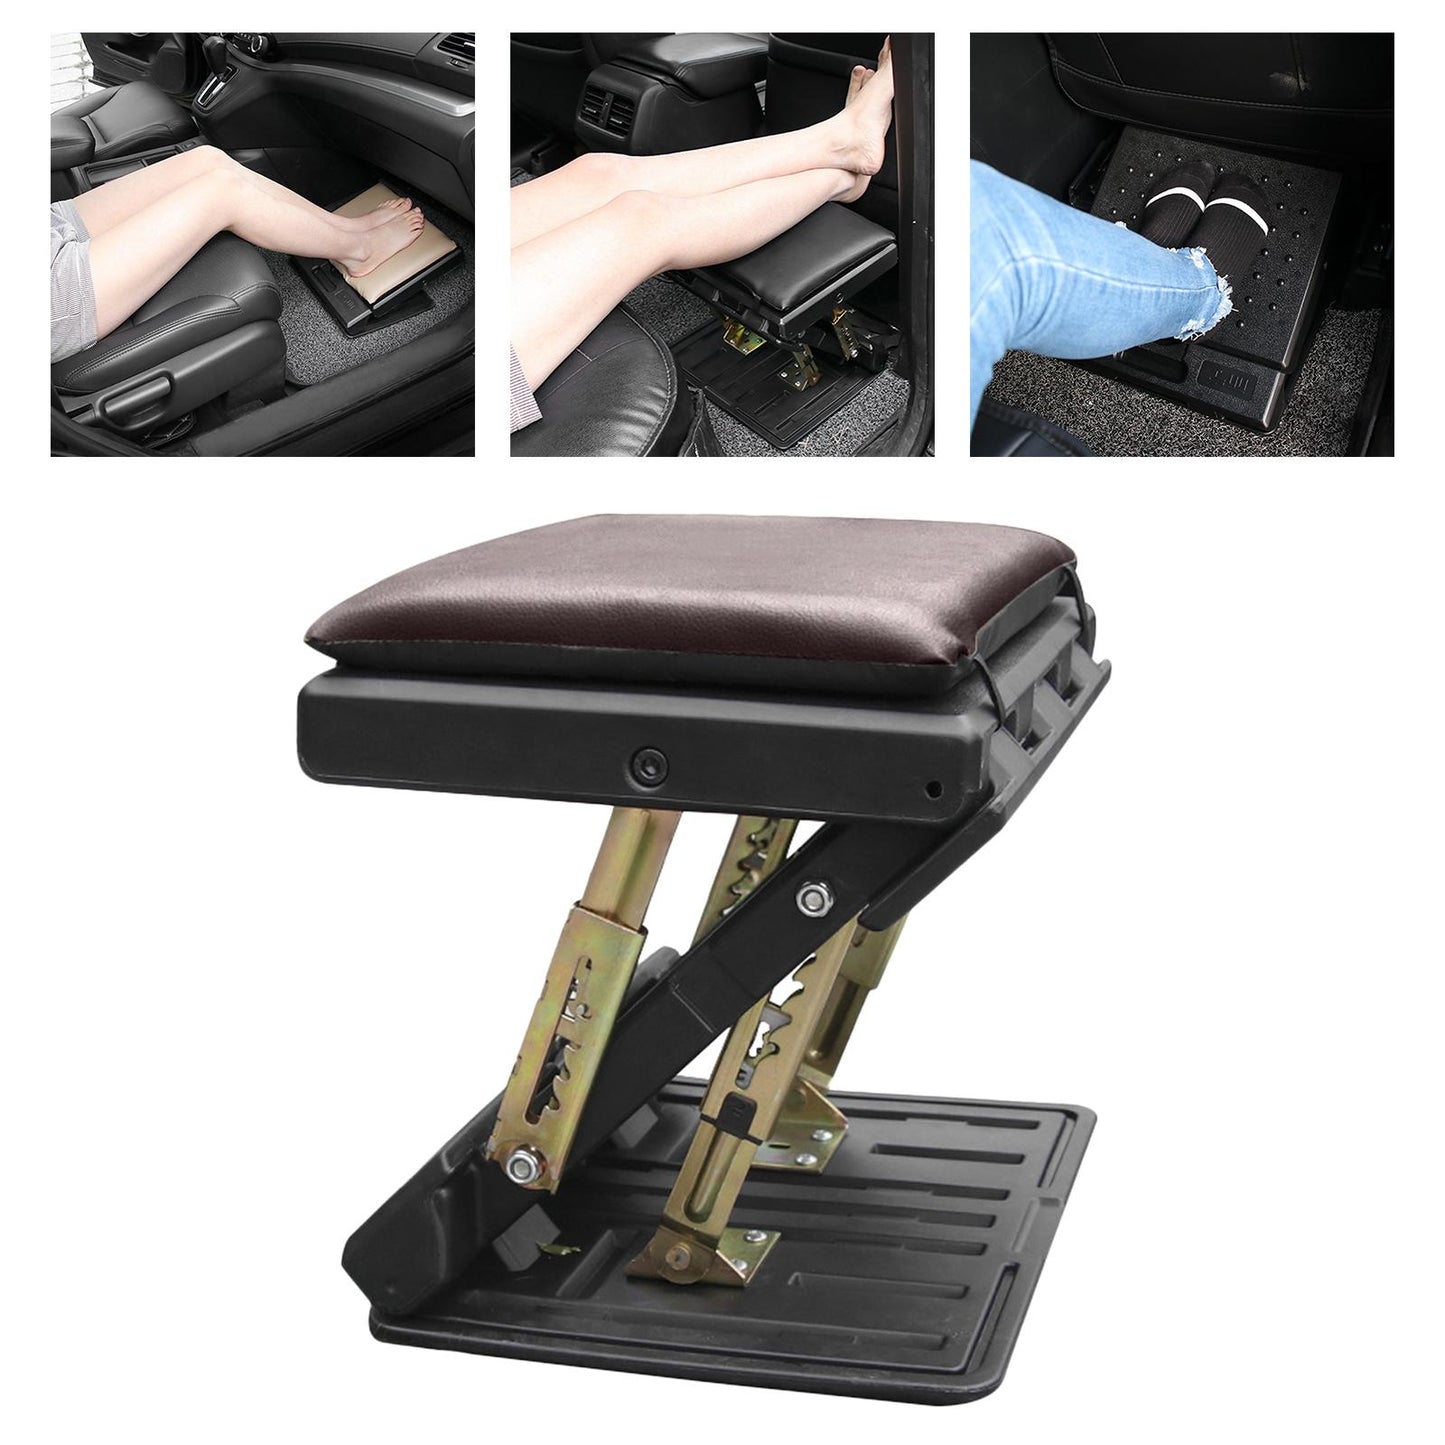 Adjustable Footrest with Maaging Beads Universal Fits for Car Under Desk